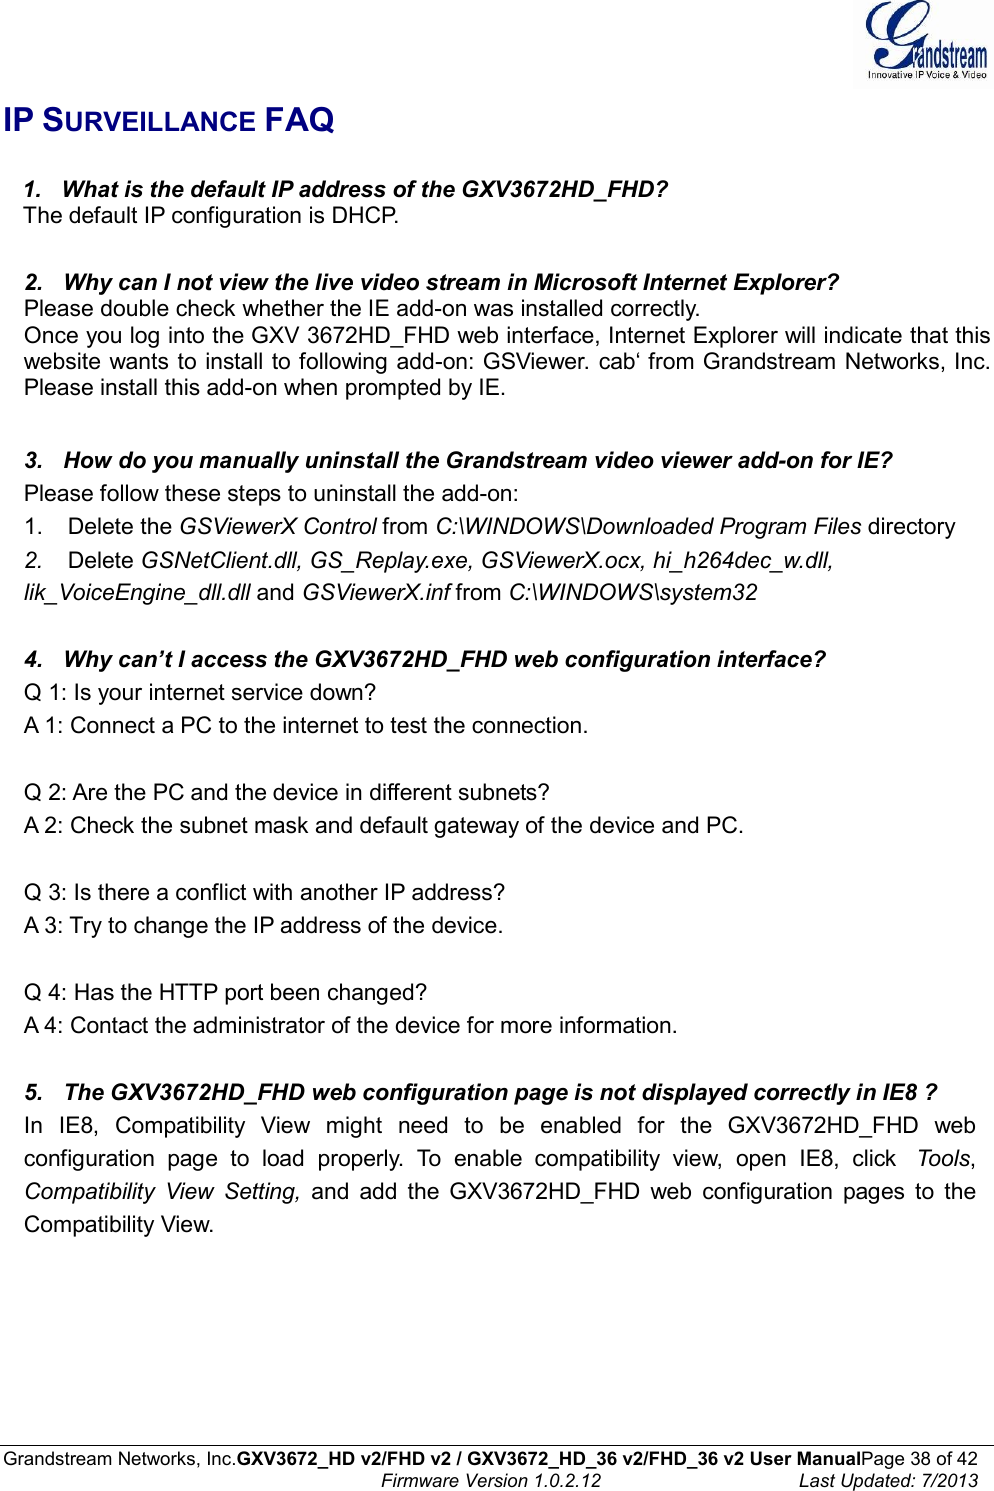  Grandstream Networks, Inc.GXV3672_HD v2/FHD v2 / GXV3672_HD_36 v2/FHD_36 v2 User ManualPage 38 of 42    Firmware Version 1.0.2.12  Last Updated: 7/2013  IP SURVEILLANCE FAQ     1.   What is the default IP address of the GXV3672HD_FHD?    The default IP configuration is DHCP.   2.   Why can I not view the live video stream in Microsoft Internet Explorer? Please double check whether the IE add-on was installed correctly. Once you log into the GXV 3672HD_FHD web interface, Internet Explorer will indicate that this website wants to install to following add-on: GSViewer. cab‘ from Grandstream Networks, Inc. Please install this add-on when prompted by IE.   3.   How do you manually uninstall the Grandstream video viewer add-on for IE? Please follow these steps to uninstall the add-on: 1.    Delete the GSViewerX Control from C:\WINDOWS\Downloaded Program Files directory 2.    Delete GSNetClient.dll, GS_Replay.exe, GSViewerX.ocx, hi_h264dec_w.dll, lik_VoiceEngine_dll.dll and GSViewerX.inf from C:\WINDOWS\system32   4.   Why can’t I access the GXV3672HD_FHD web configuration interface? Q 1: Is your internet service down? A 1: Connect a PC to the internet to test the connection.   Q 2: Are the PC and the device in different subnets? A 2: Check the subnet mask and default gateway of the device and PC.   Q 3: Is there a conflict with another IP address? A 3: Try to change the IP address of the device.   Q 4: Has the HTTP port been changed? A 4: Contact the administrator of the device for more information.   5.   The GXV3672HD_FHD web configuration page is not displayed correctly in IE8 ? In  IE8,  Compatibility  View  might  need  to  be  enabled  for  the  GXV3672HD_FHD  web configuration  page  to  load  properly.  To  enable  compatibility  view,  open  IE8,  click    Tools, Compatibility  View  Setting,  and  add  the  GXV3672HD_FHD  web  configuration  pages  to  the Compatibility View.   